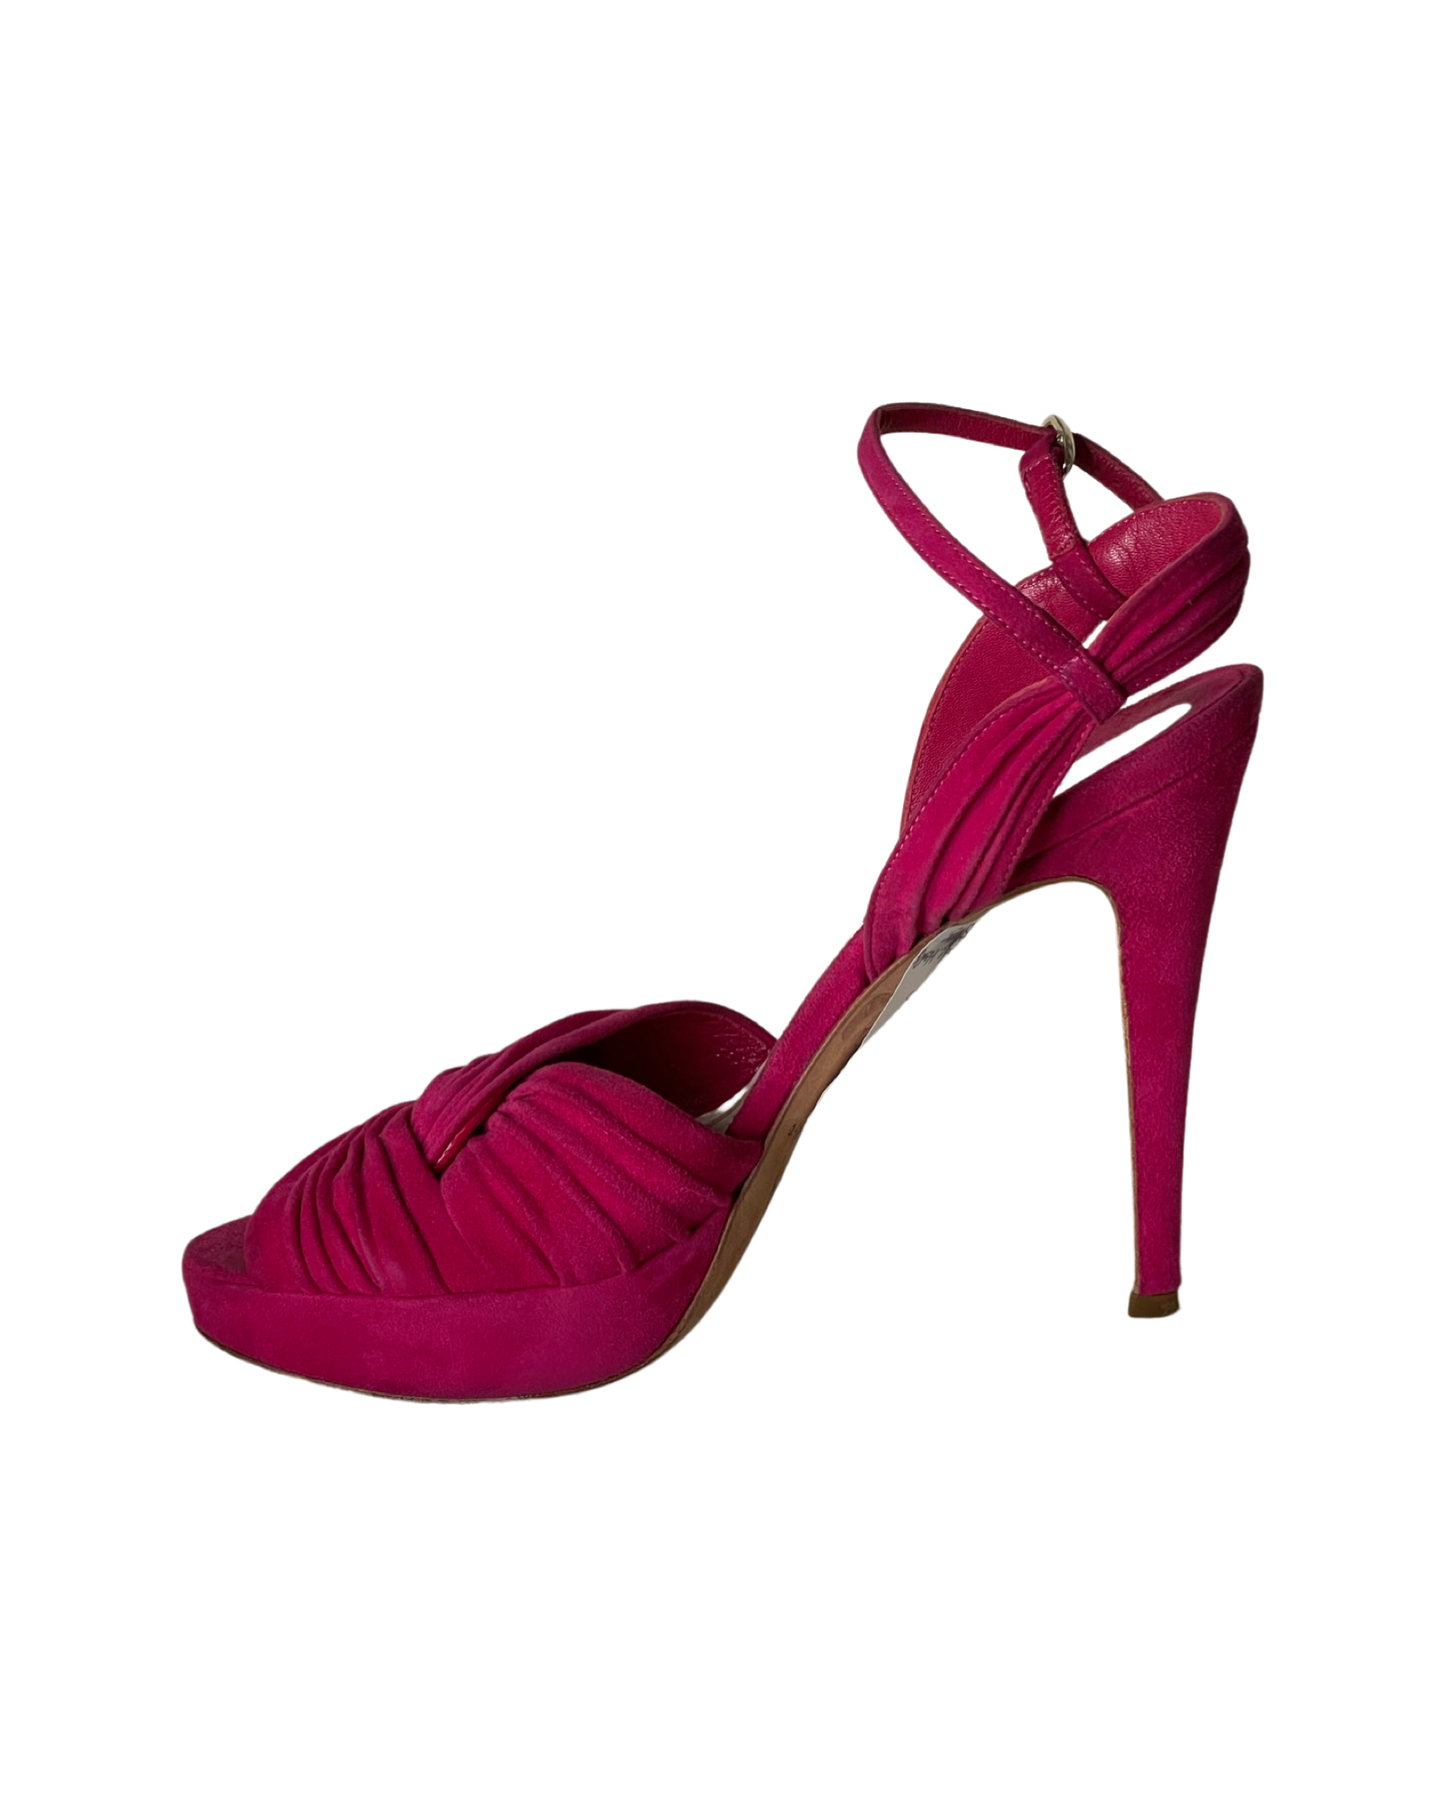 Brian Atwood Heels